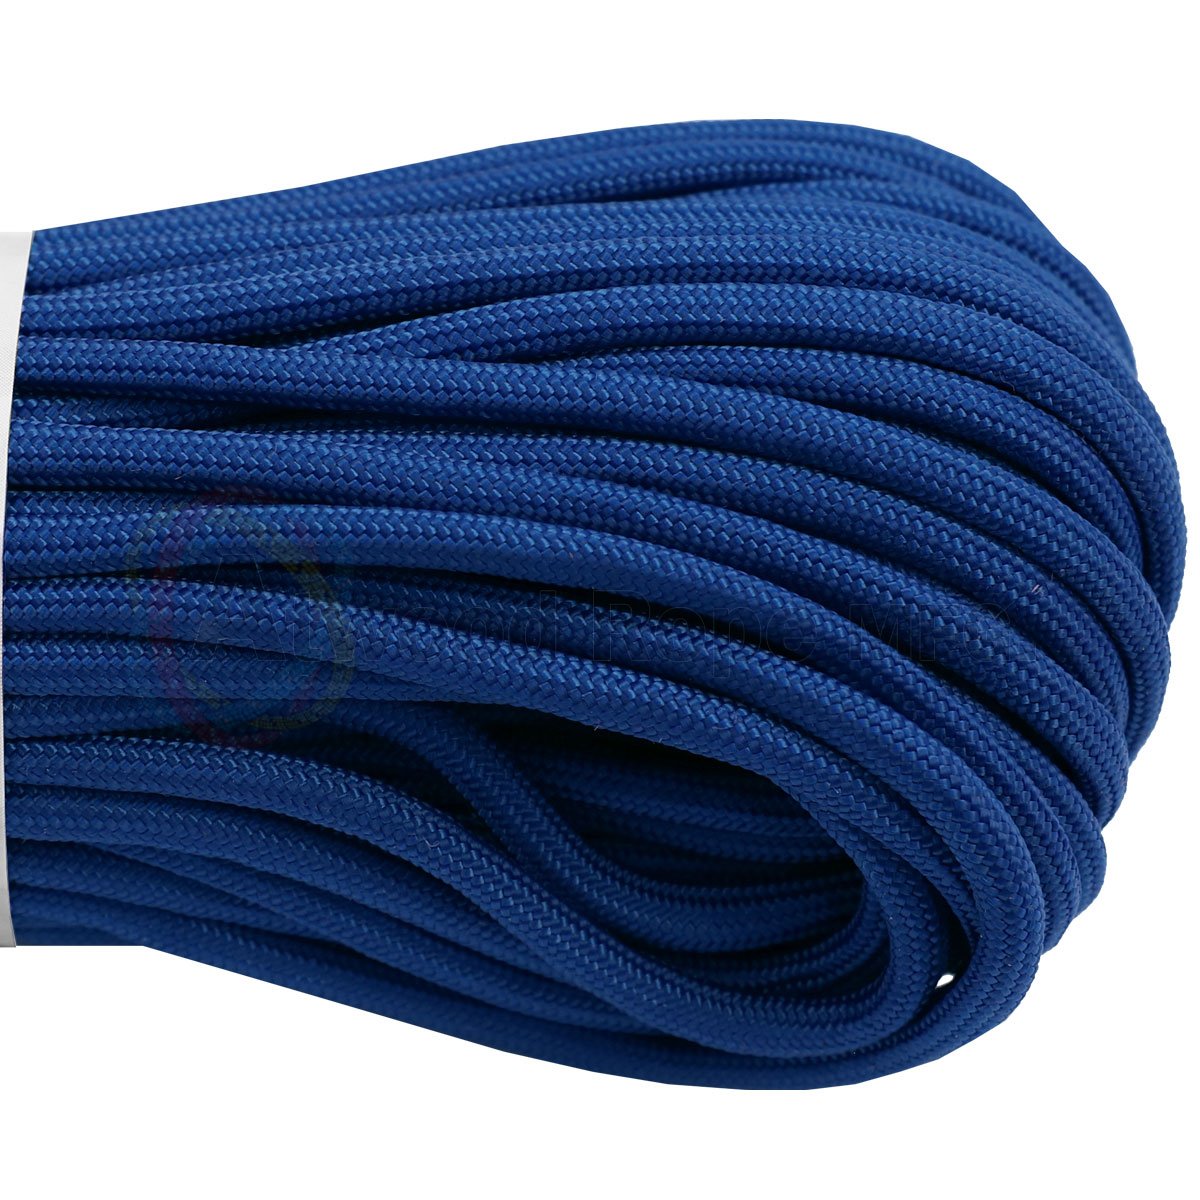 Atwood 550 Paracord - Royal Blue